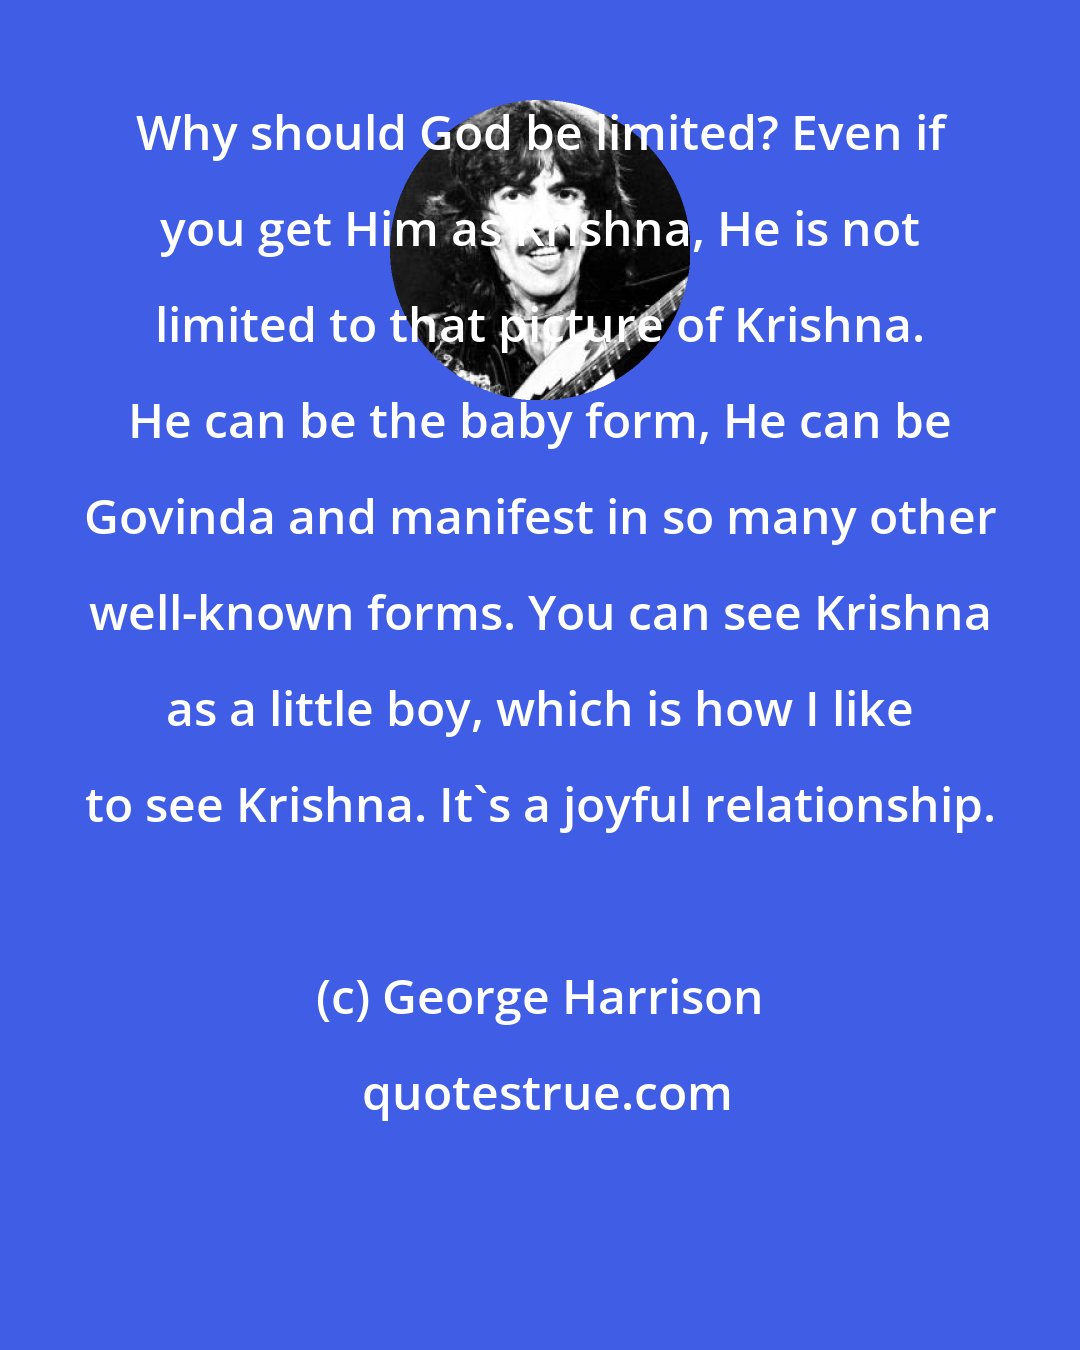 George Harrison: Why should God be limited? Even if you get Him as Krishna, He is not limited to that picture of Krishna. He can be the baby form, He can be Govinda and manifest in so many other well-known forms. You can see Krishna as a little boy, which is how I like to see Krishna. It's a joyful relationship.